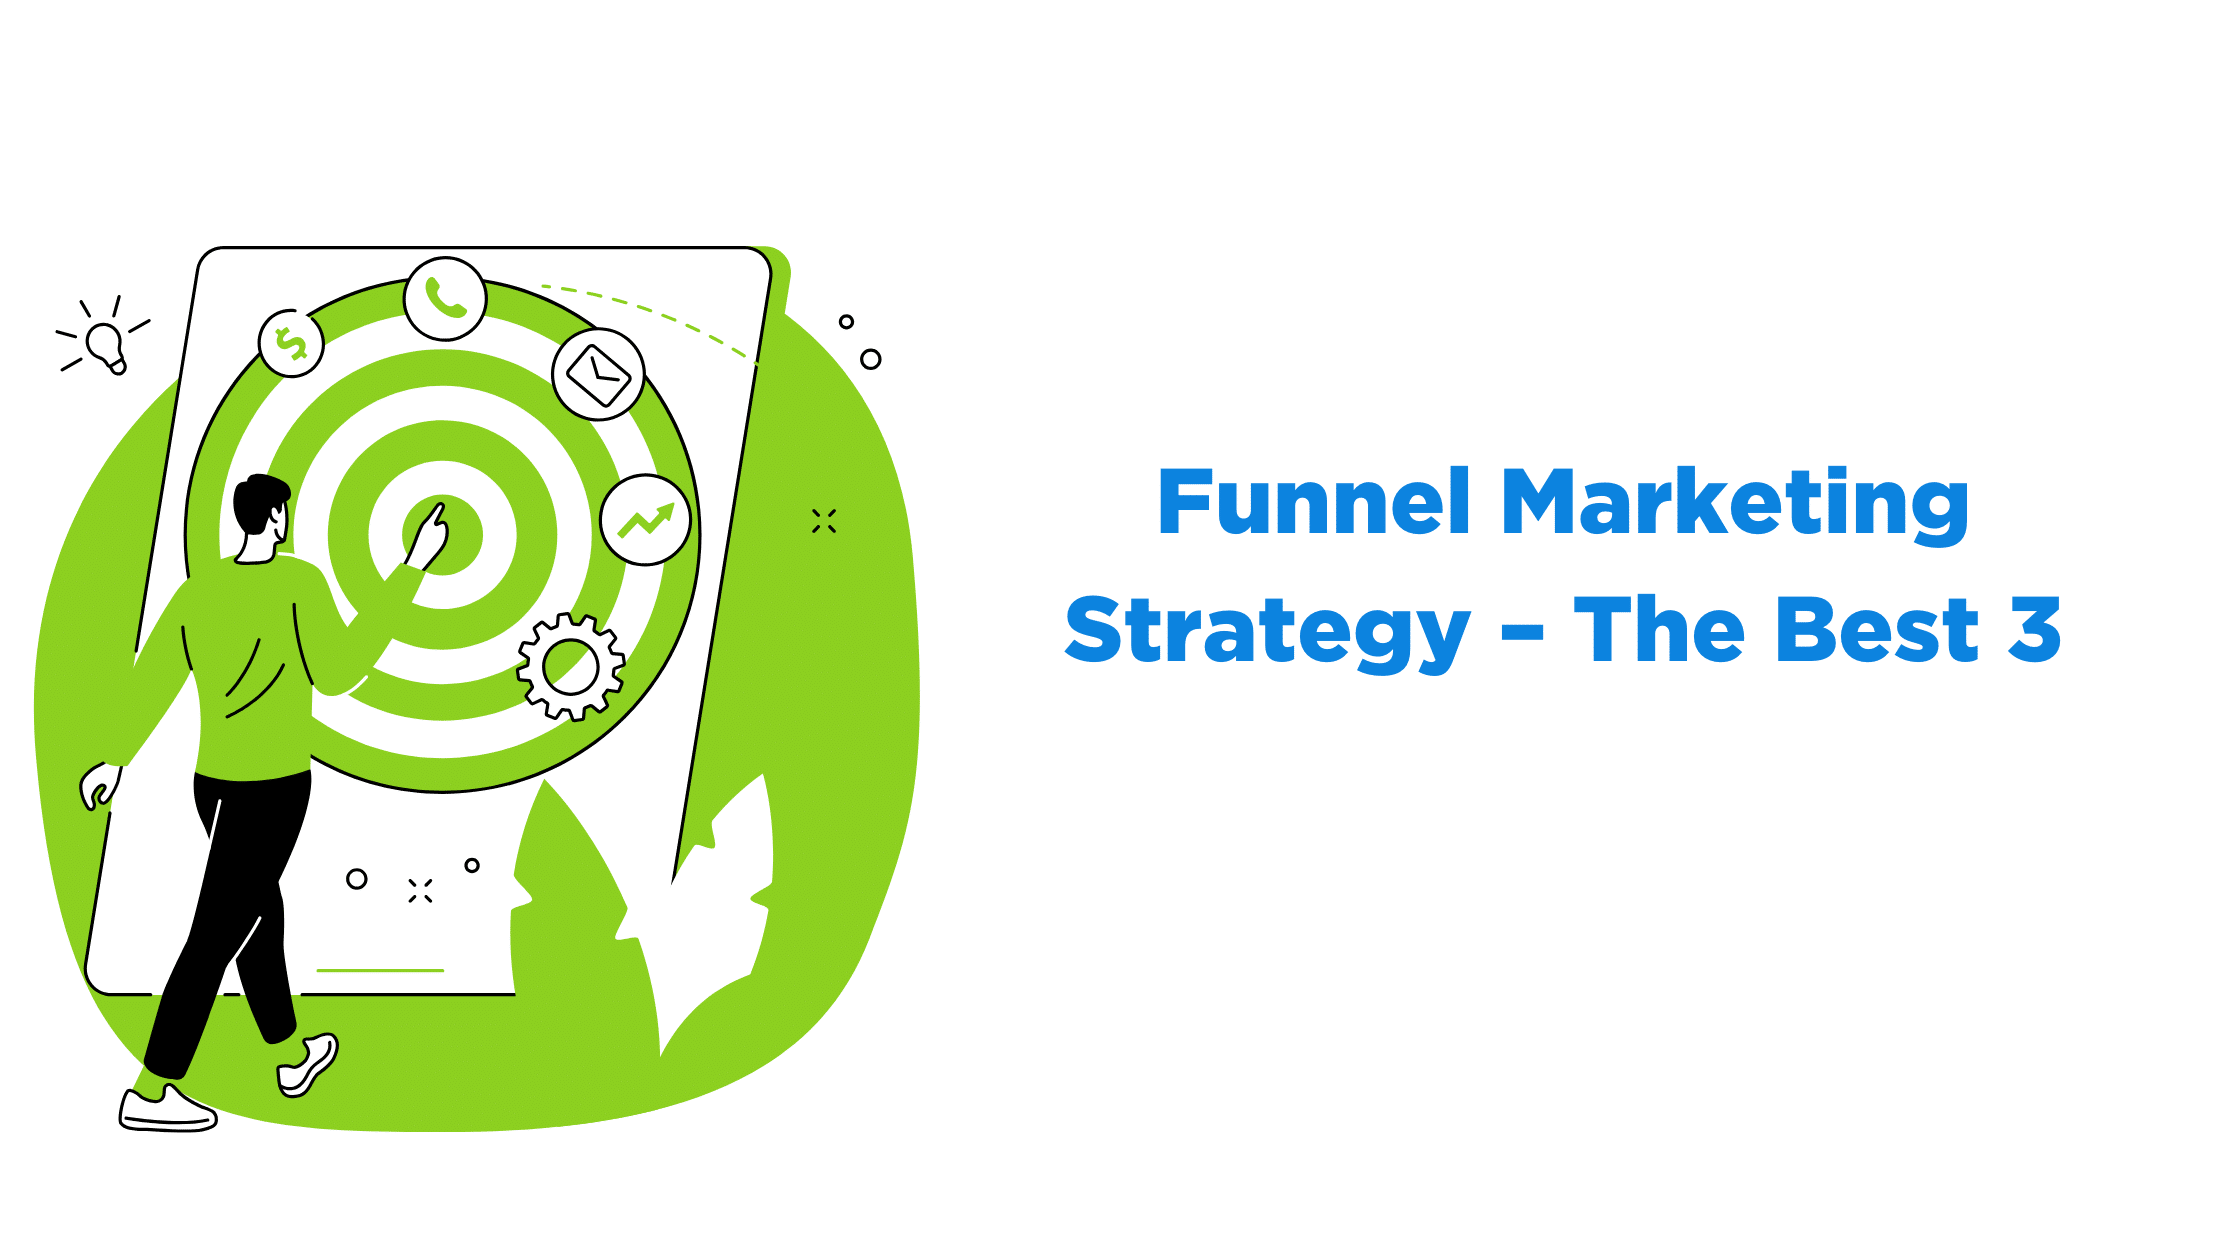 Funnel Marketing Strategy – The Best 3